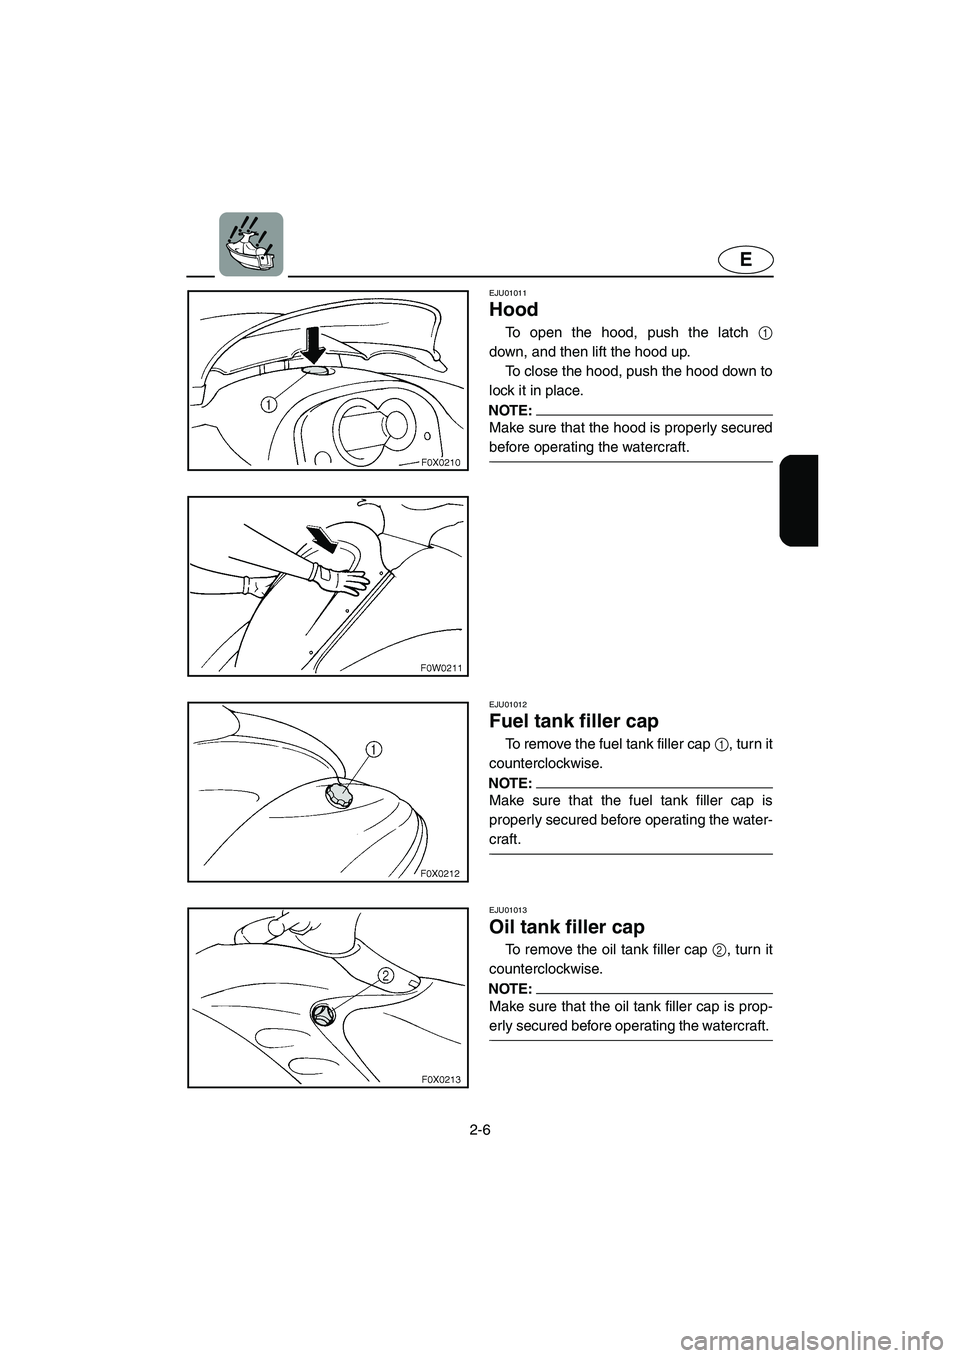 YAMAHA GP800R 2002  Owners Manual 2-6
E
EJU01011 
Hood  
To open the hood, push the latch 1
down, and then lift the hood up. 
To close the hood, push the hood down to
lock it in place. 
NOTE:@ Make sure that the hood is properly secur